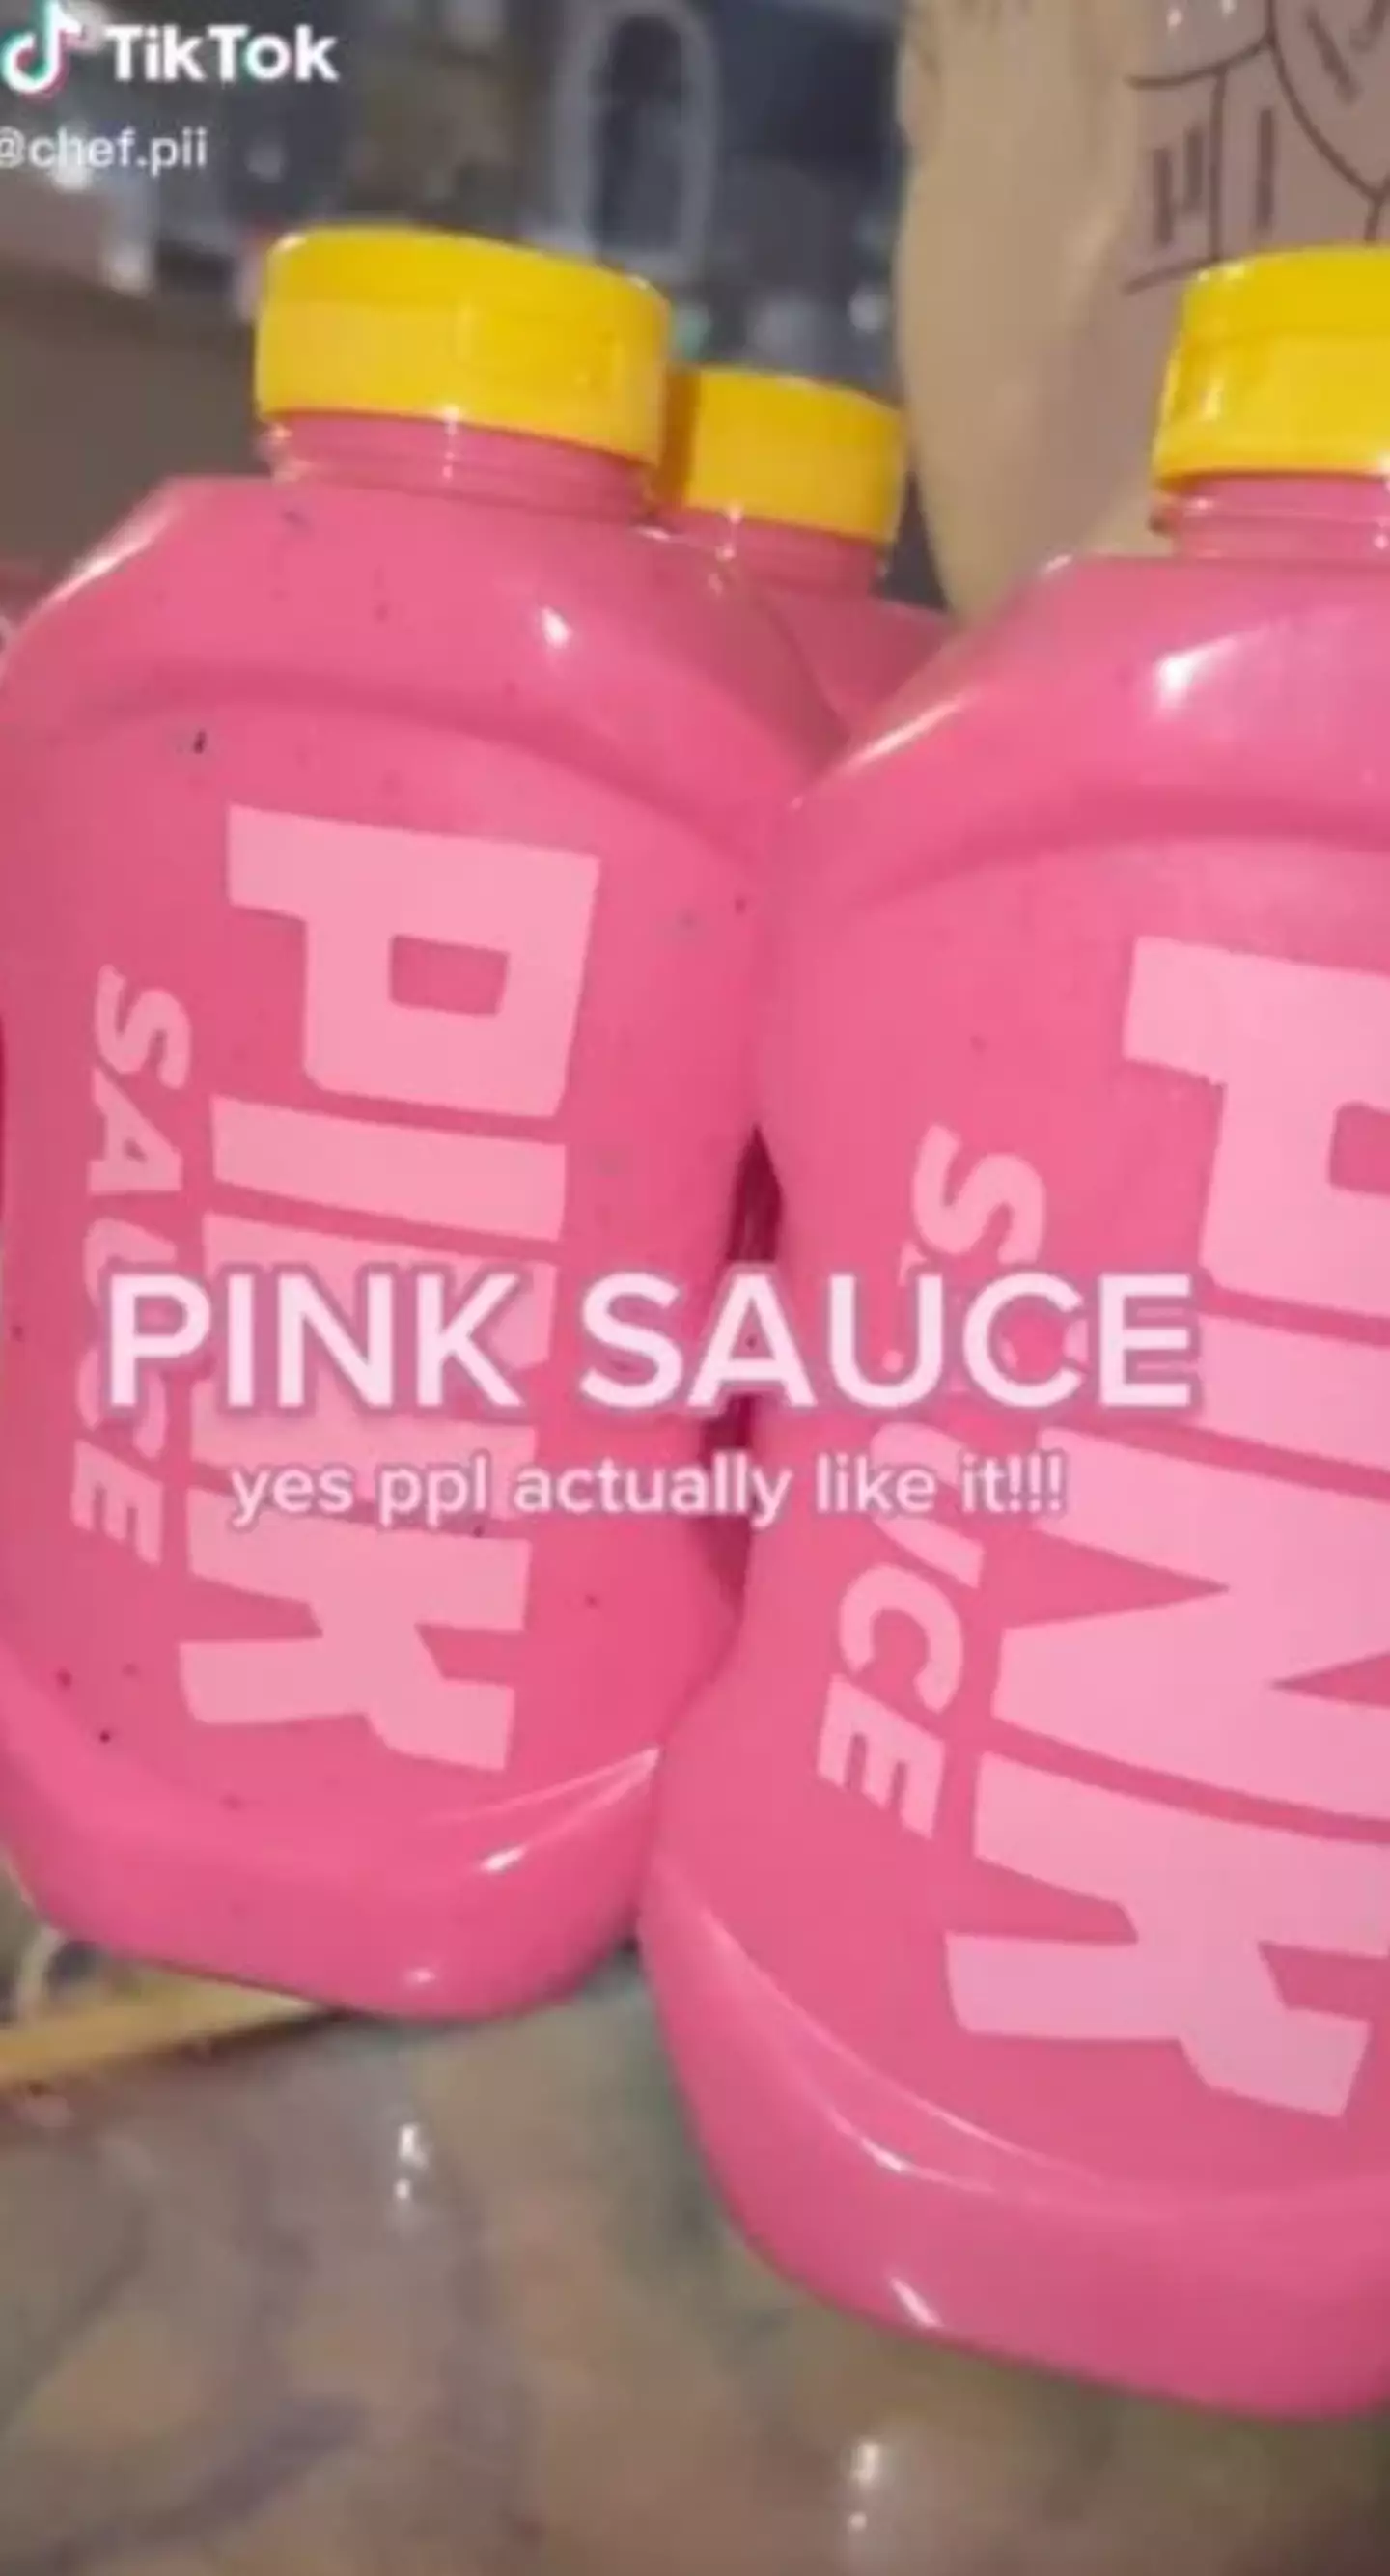 A chef on TikTok has come under fire for selling a fluorescent pink sauce for $20 a pop that allegedly isn’t FDA approved.